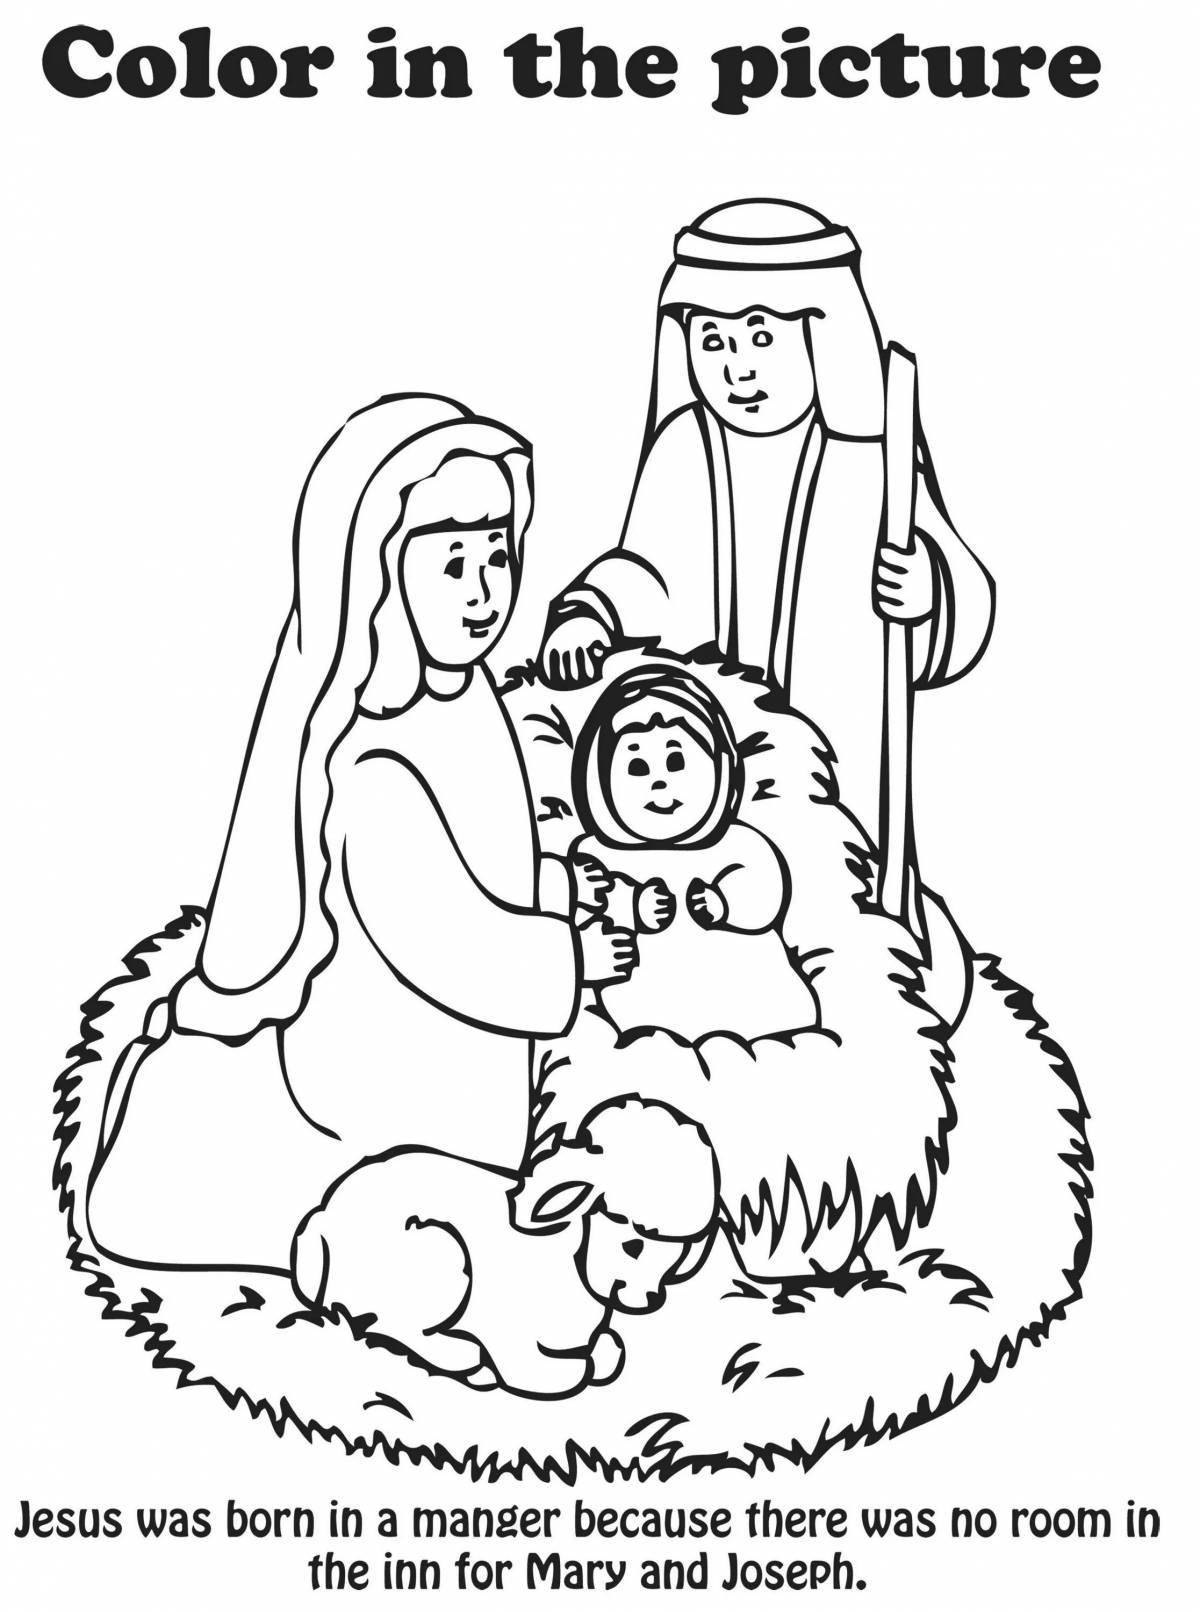 Luxury christmas coloring book